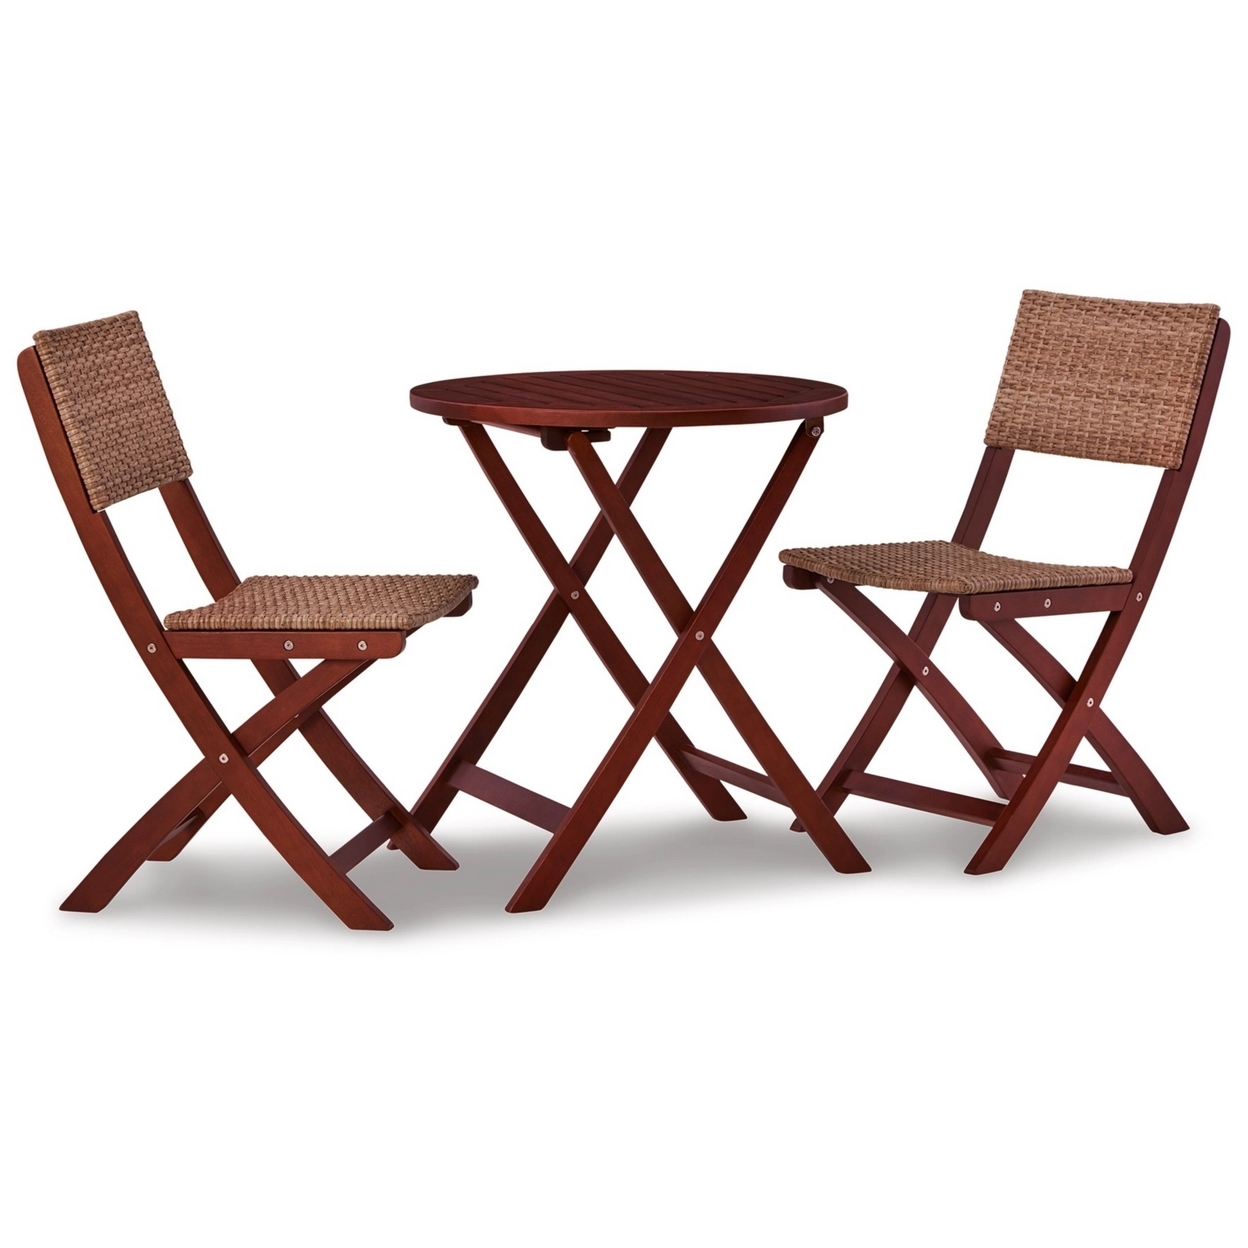 3 Piece Outdoor Bistro Set, Foldable Table And 2 Resin Wicker Chairs, Brown- Saltoro Sherpi